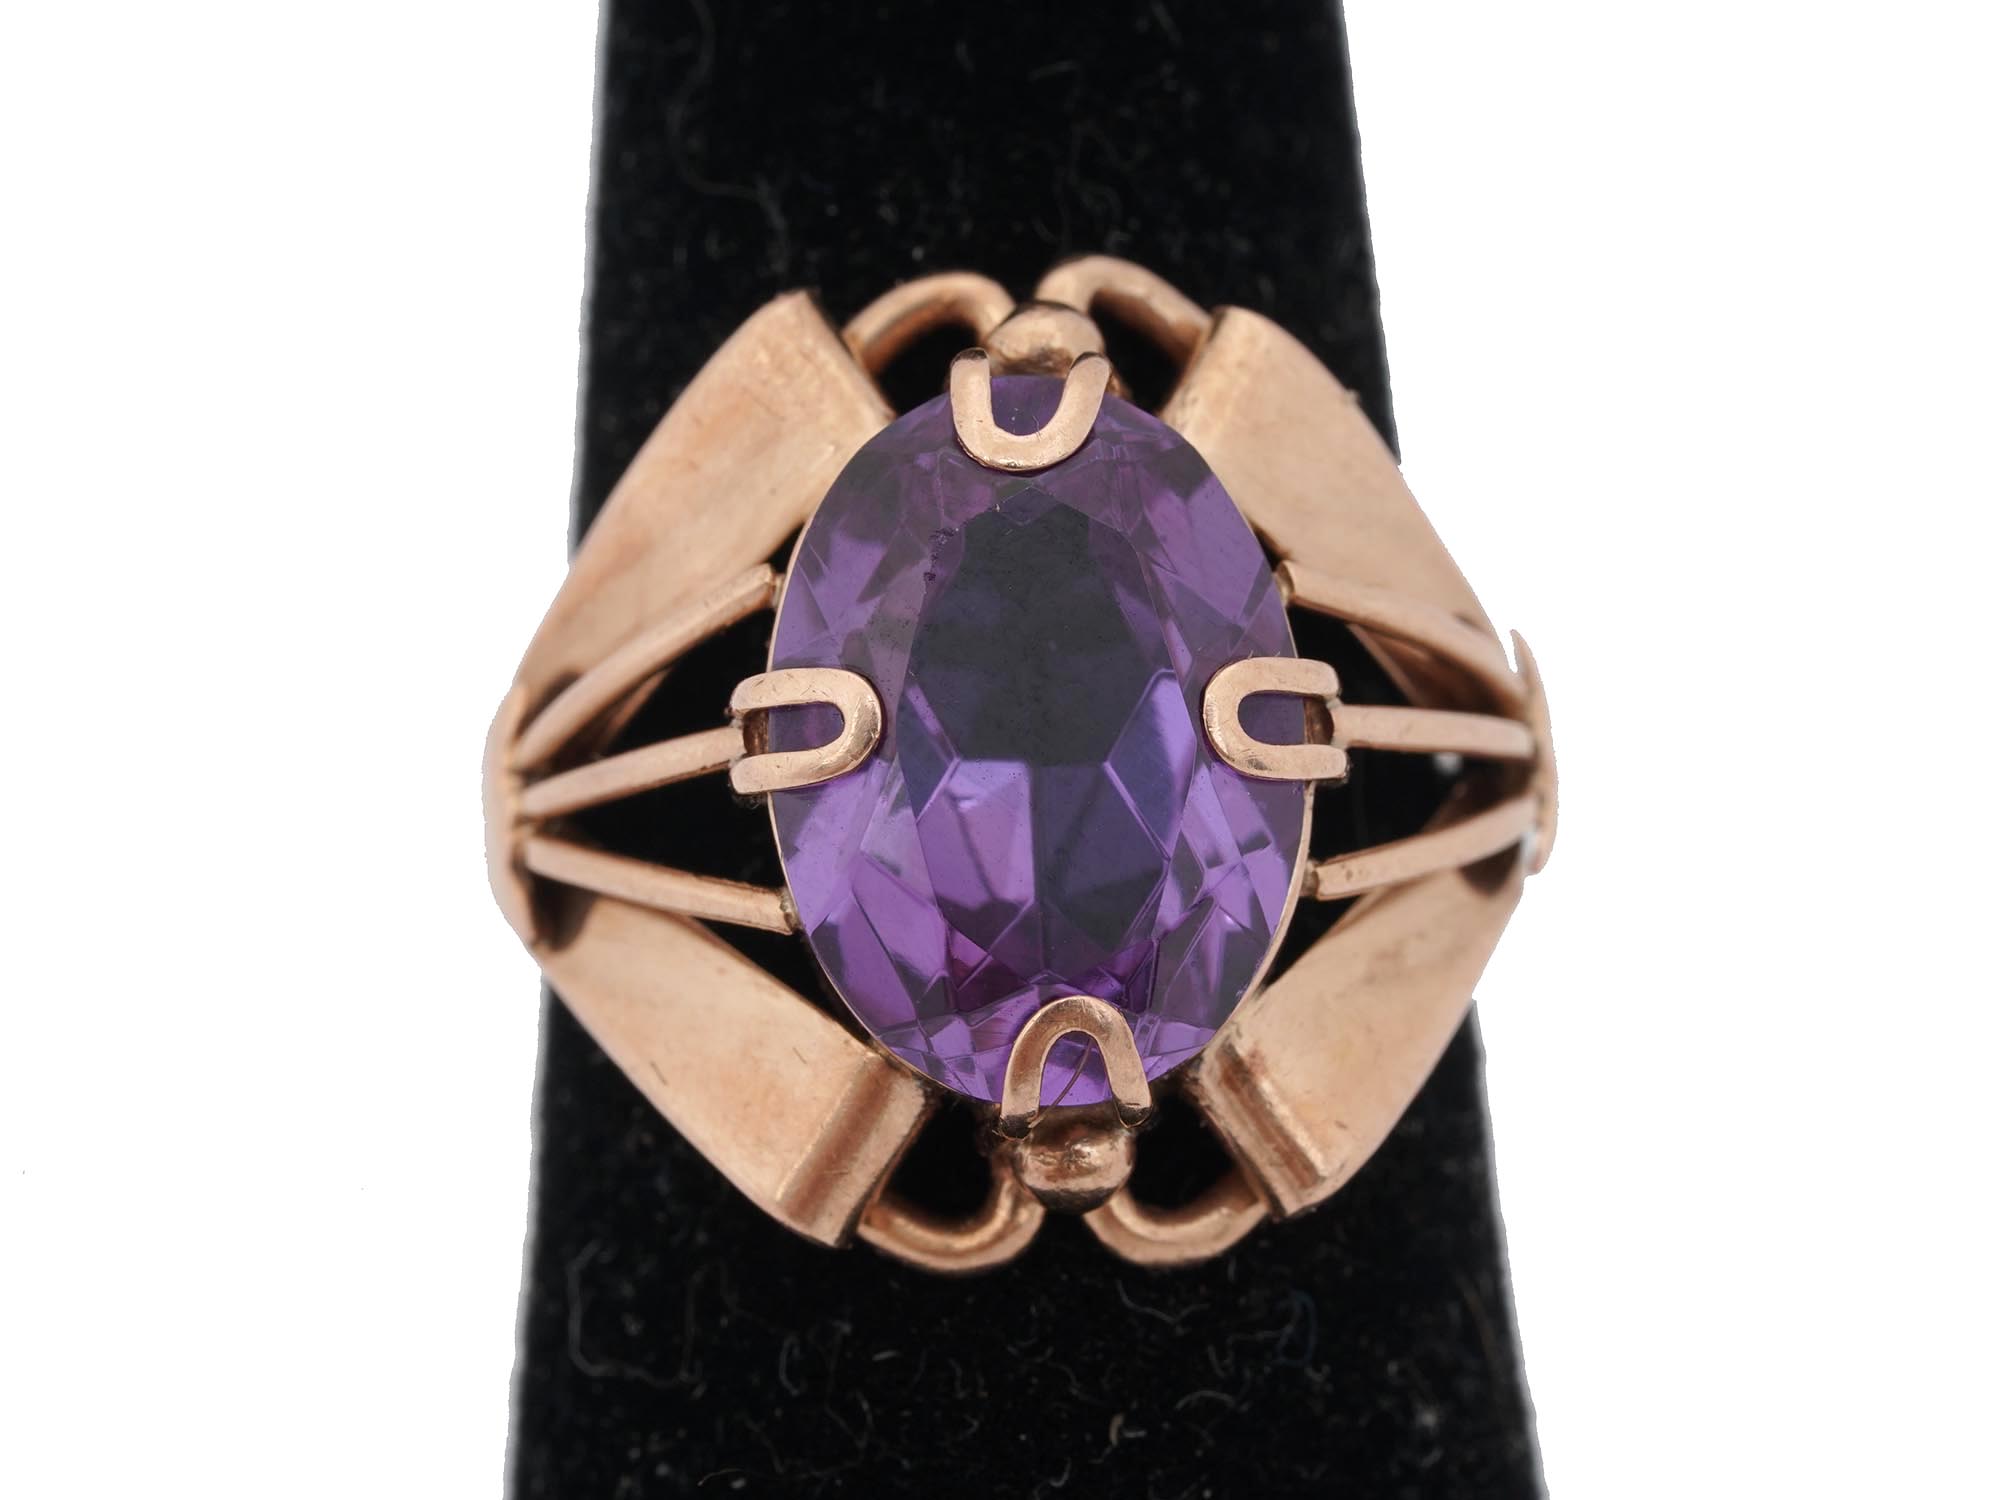 RUSSIAN SOVIET 583 GOLD RING WITH AMETHYST STONE PIC-0